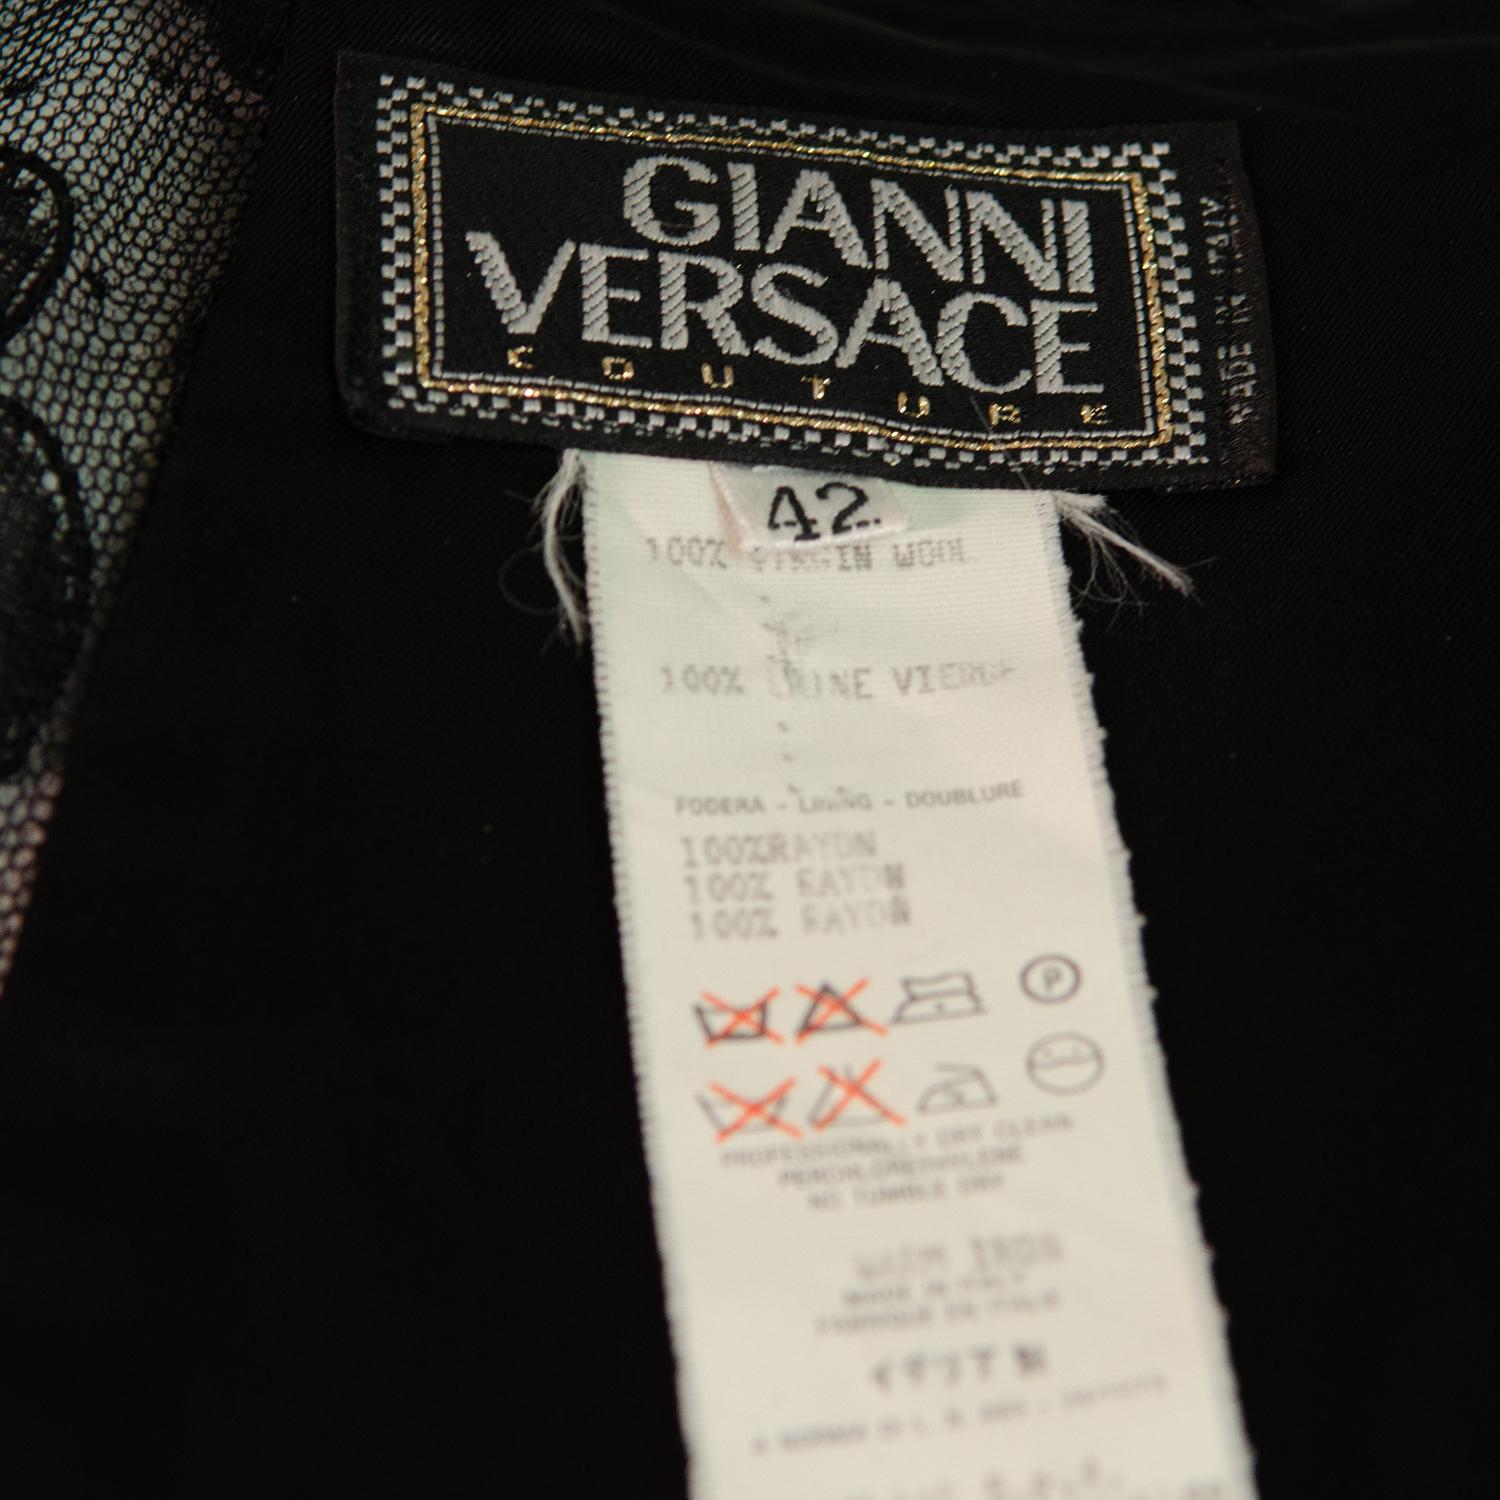 VERSACE F/W 1993 Vintage Lace Detail Black Dress by Gianni Versace For Sale 2